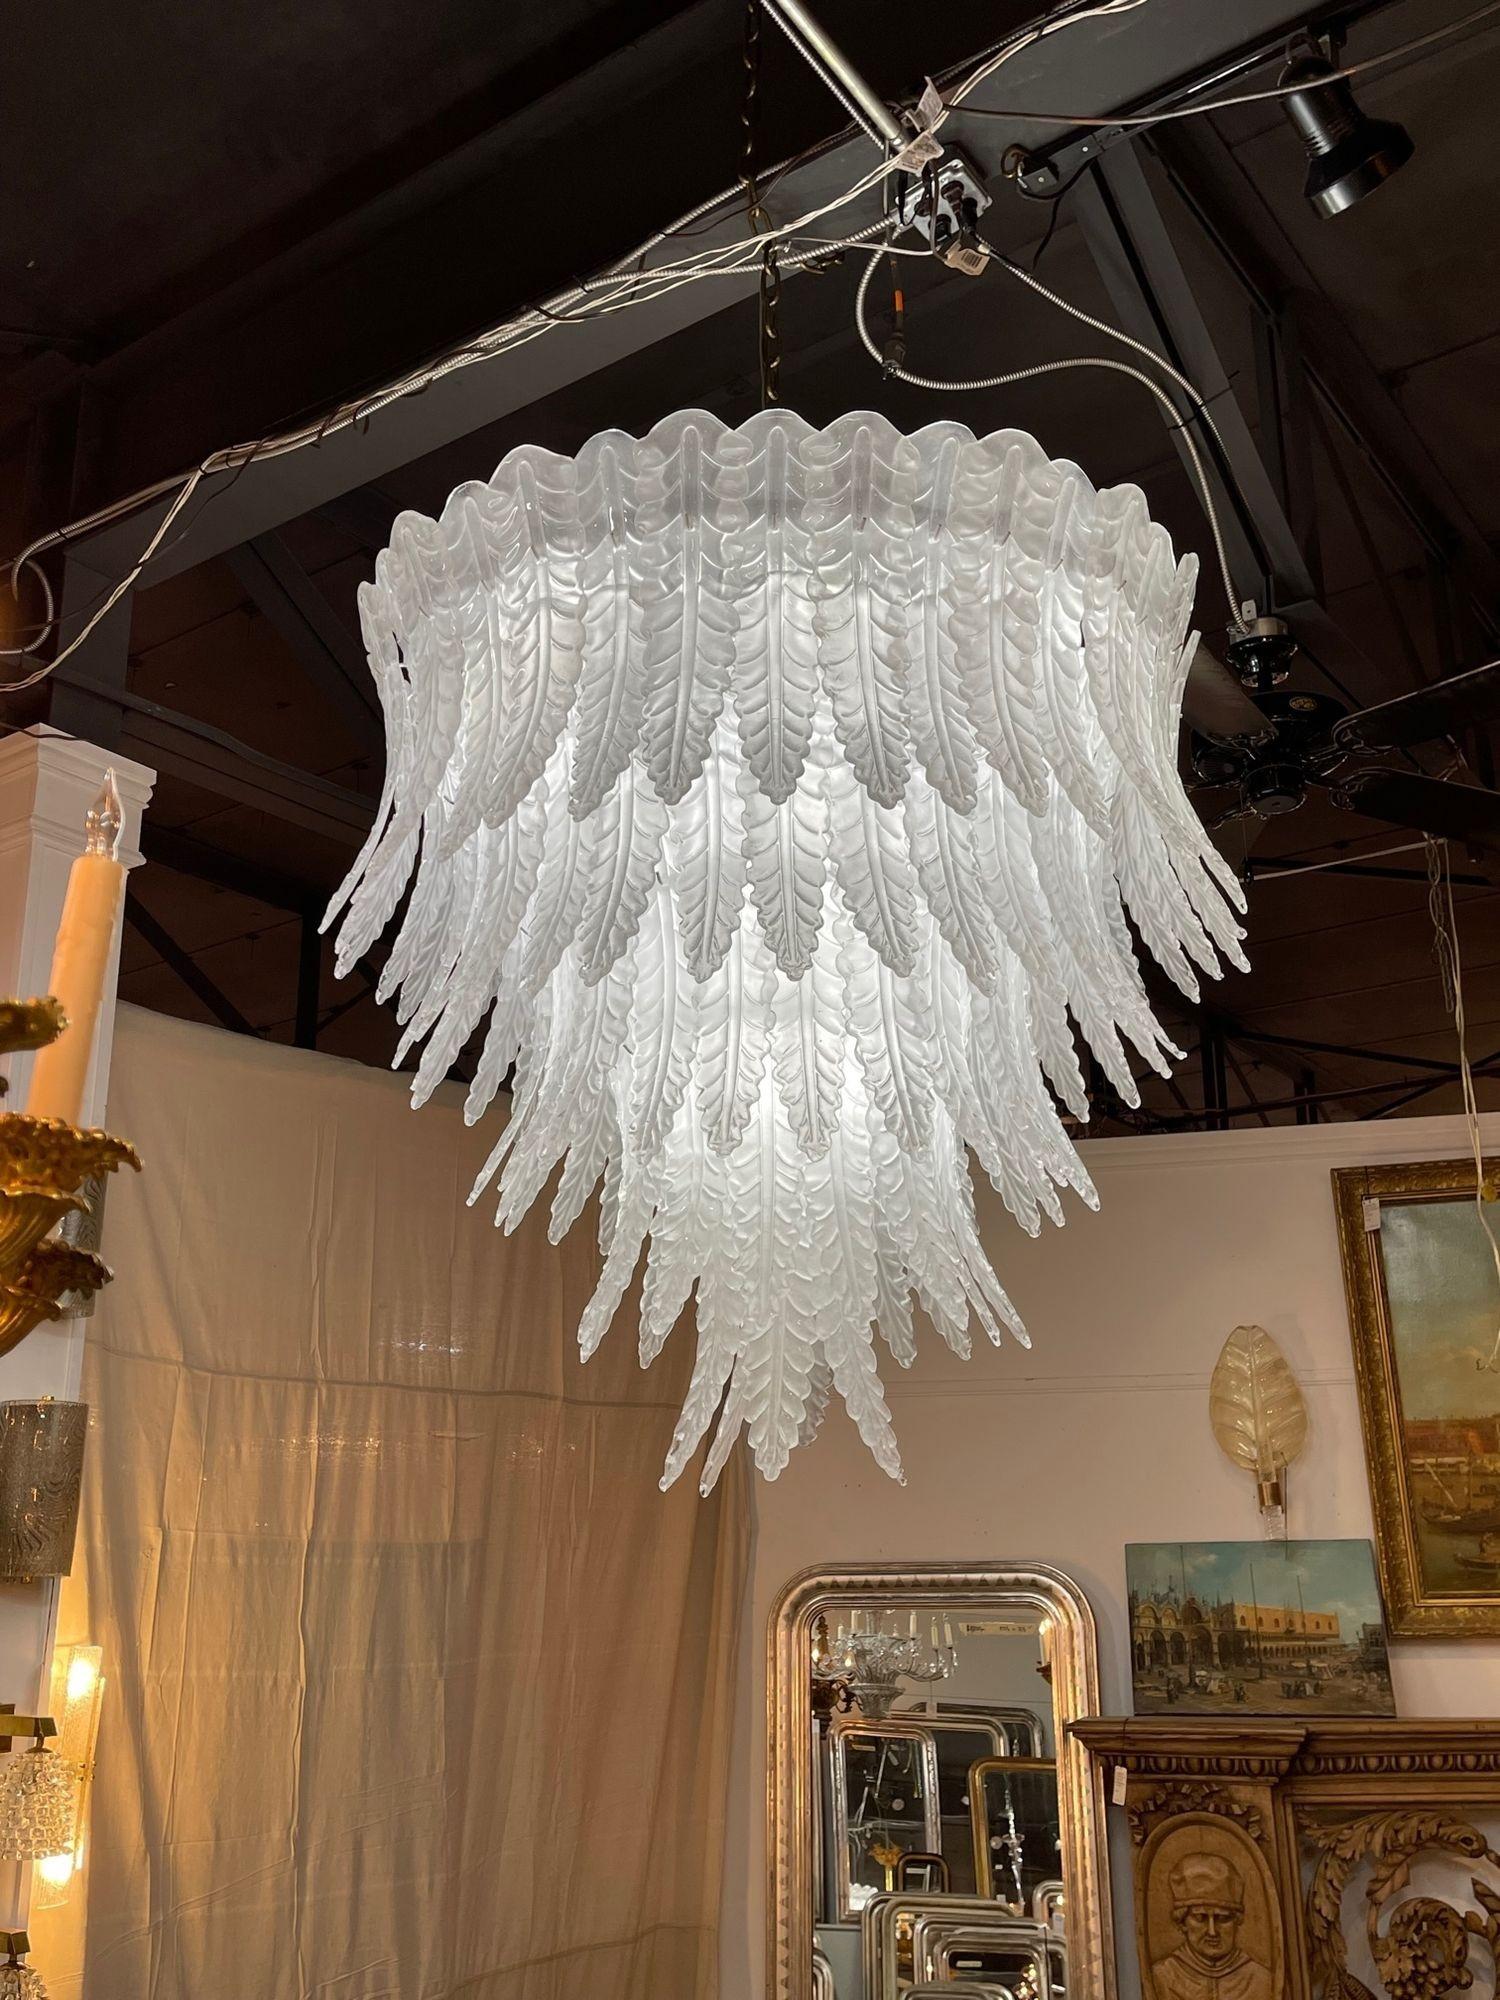 Superb large scale modern Murano glass waterfall chandelier. Featuring layers of translucent pieces of leaf shaped glass. A beautiful textural chandelier that is sure to impress. Gorgeous!!